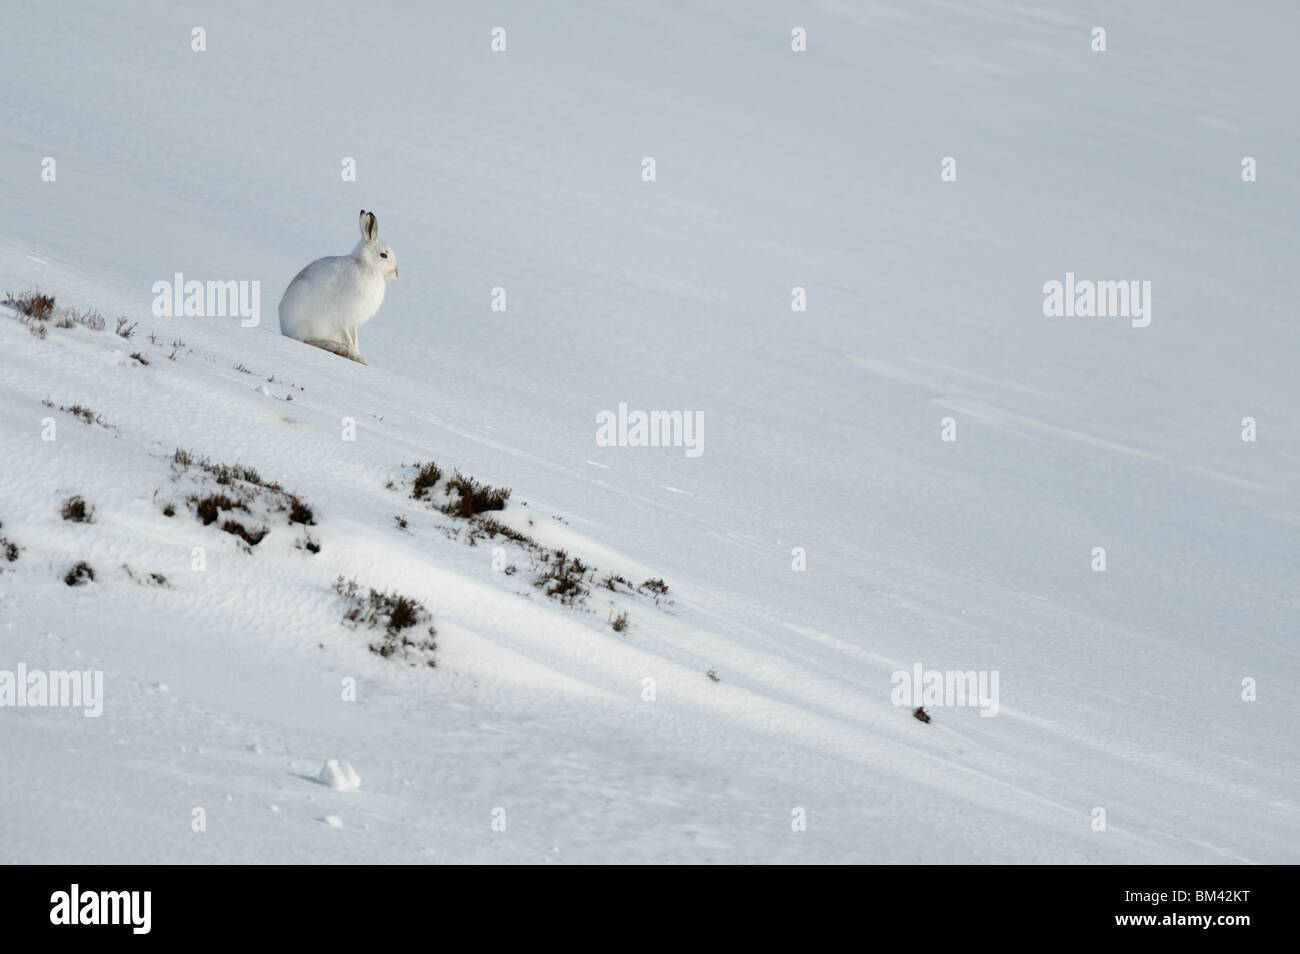 Mountain Hare (Lepus timidus) in winter pelage (coat) resting on a snowy slope, Cairngorms, Scotland. Stock Photo